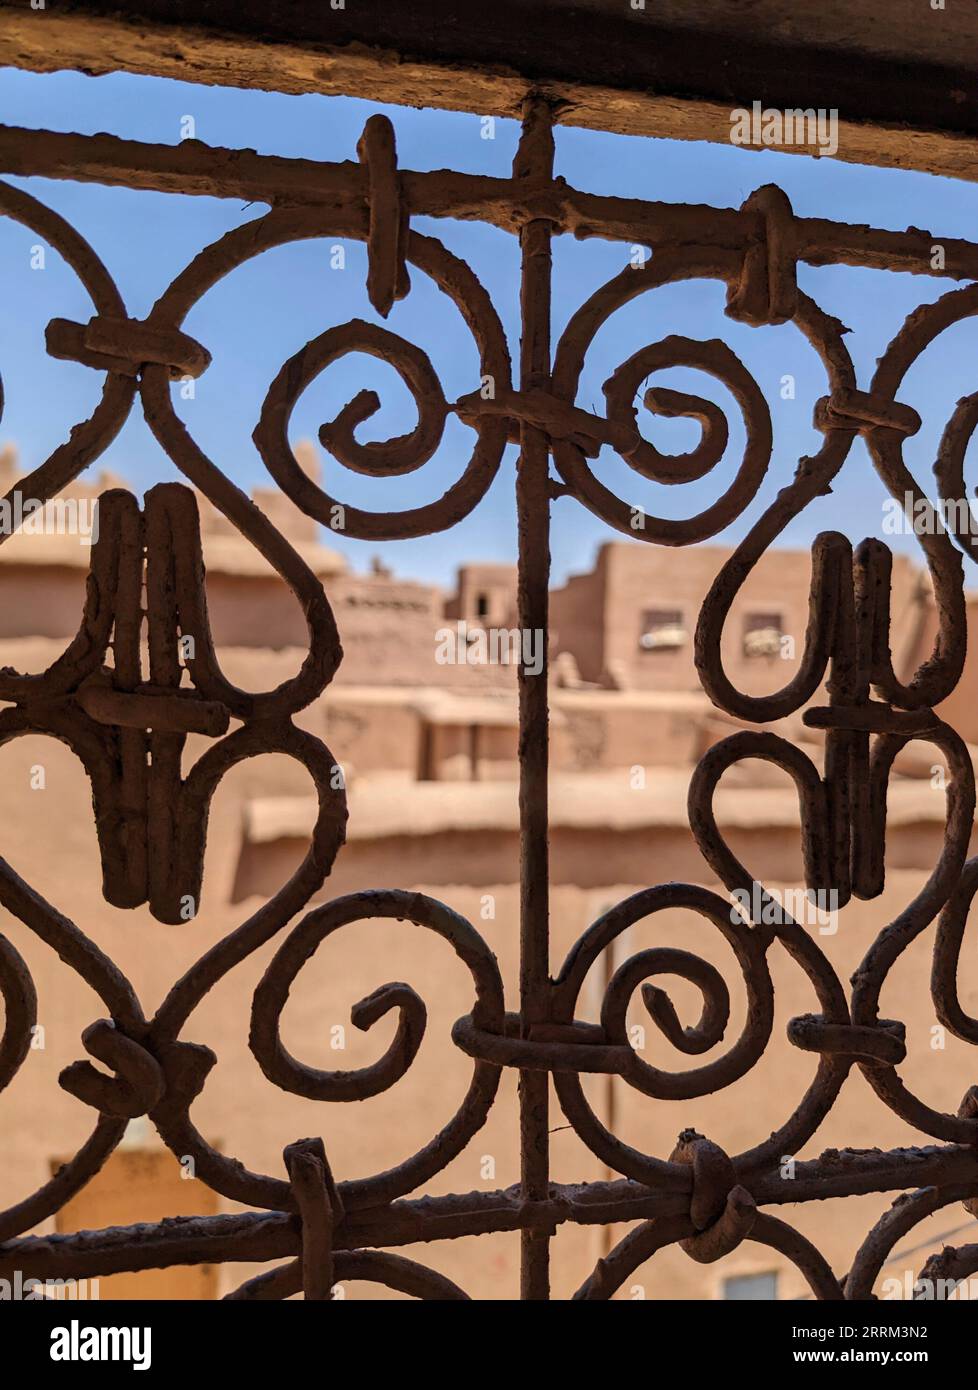 Ornate traditional window grid of a berber house ruin in the city center of Amezrou, Morocco Stock Photo